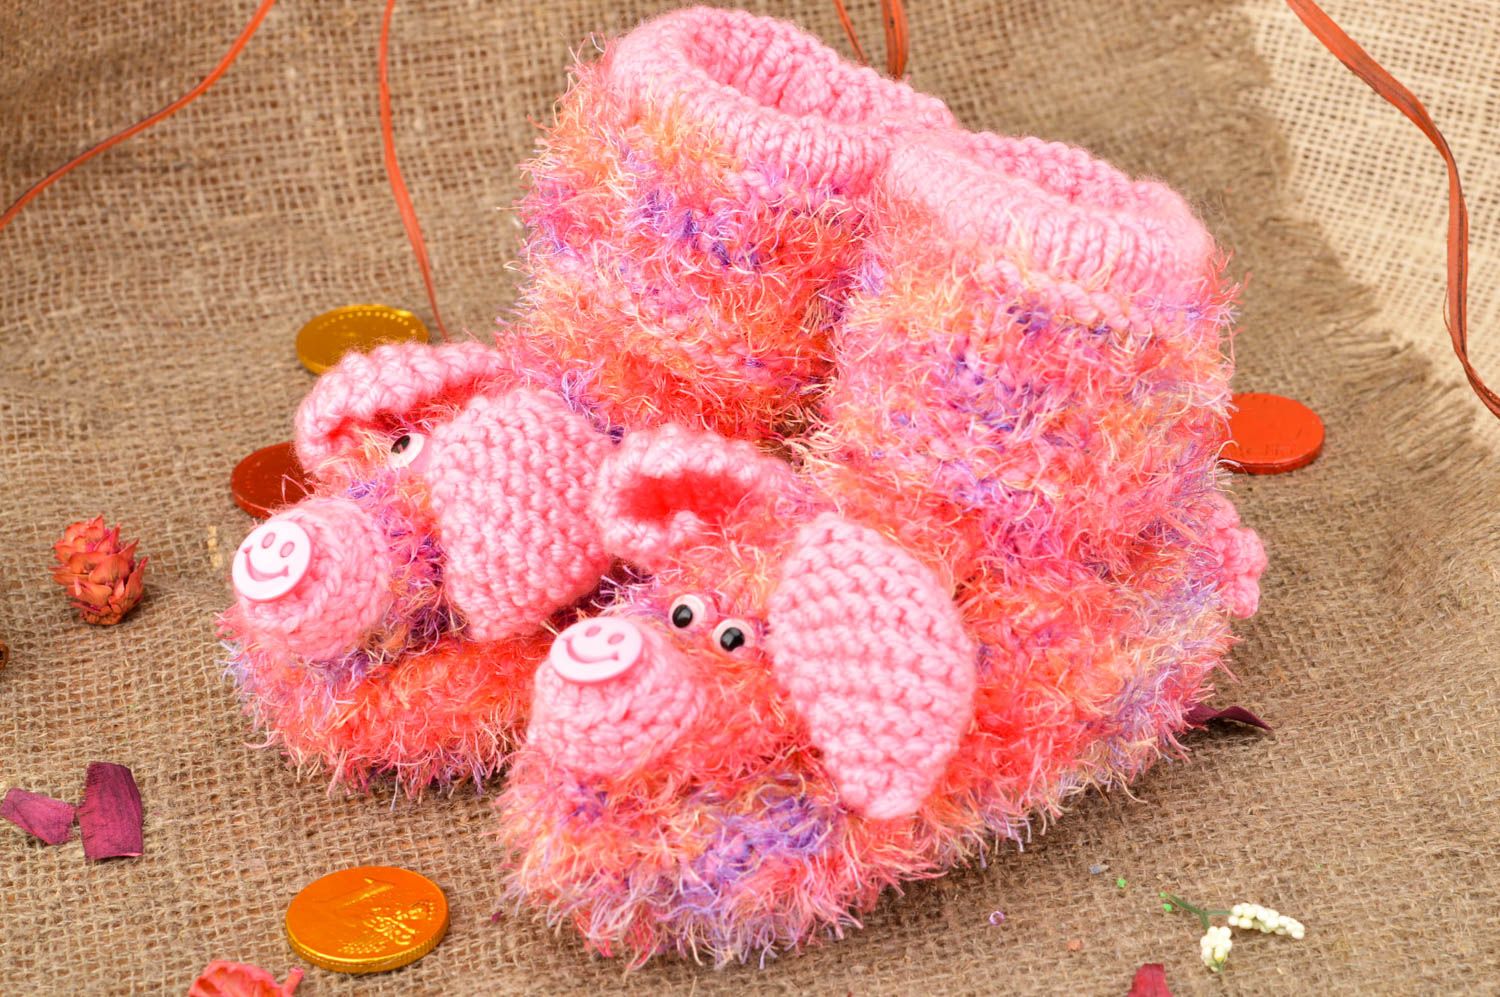 Beautiful handmade crochet slippers warm baby slippers house shoes gift ideas photo 1